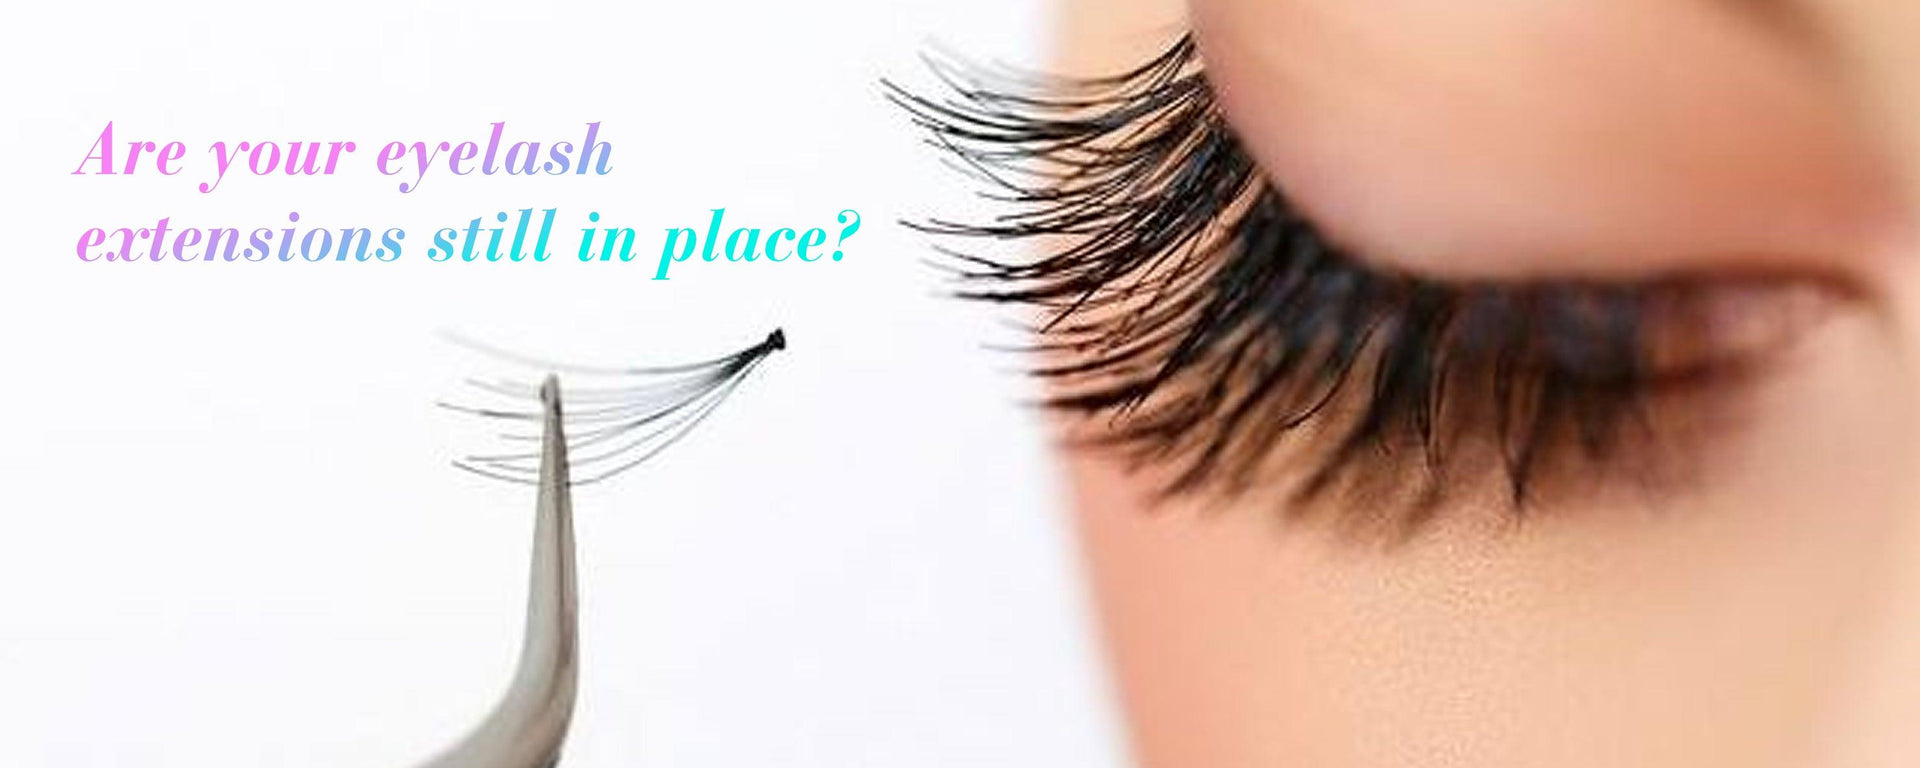 Are your eyelash extensions still in place?